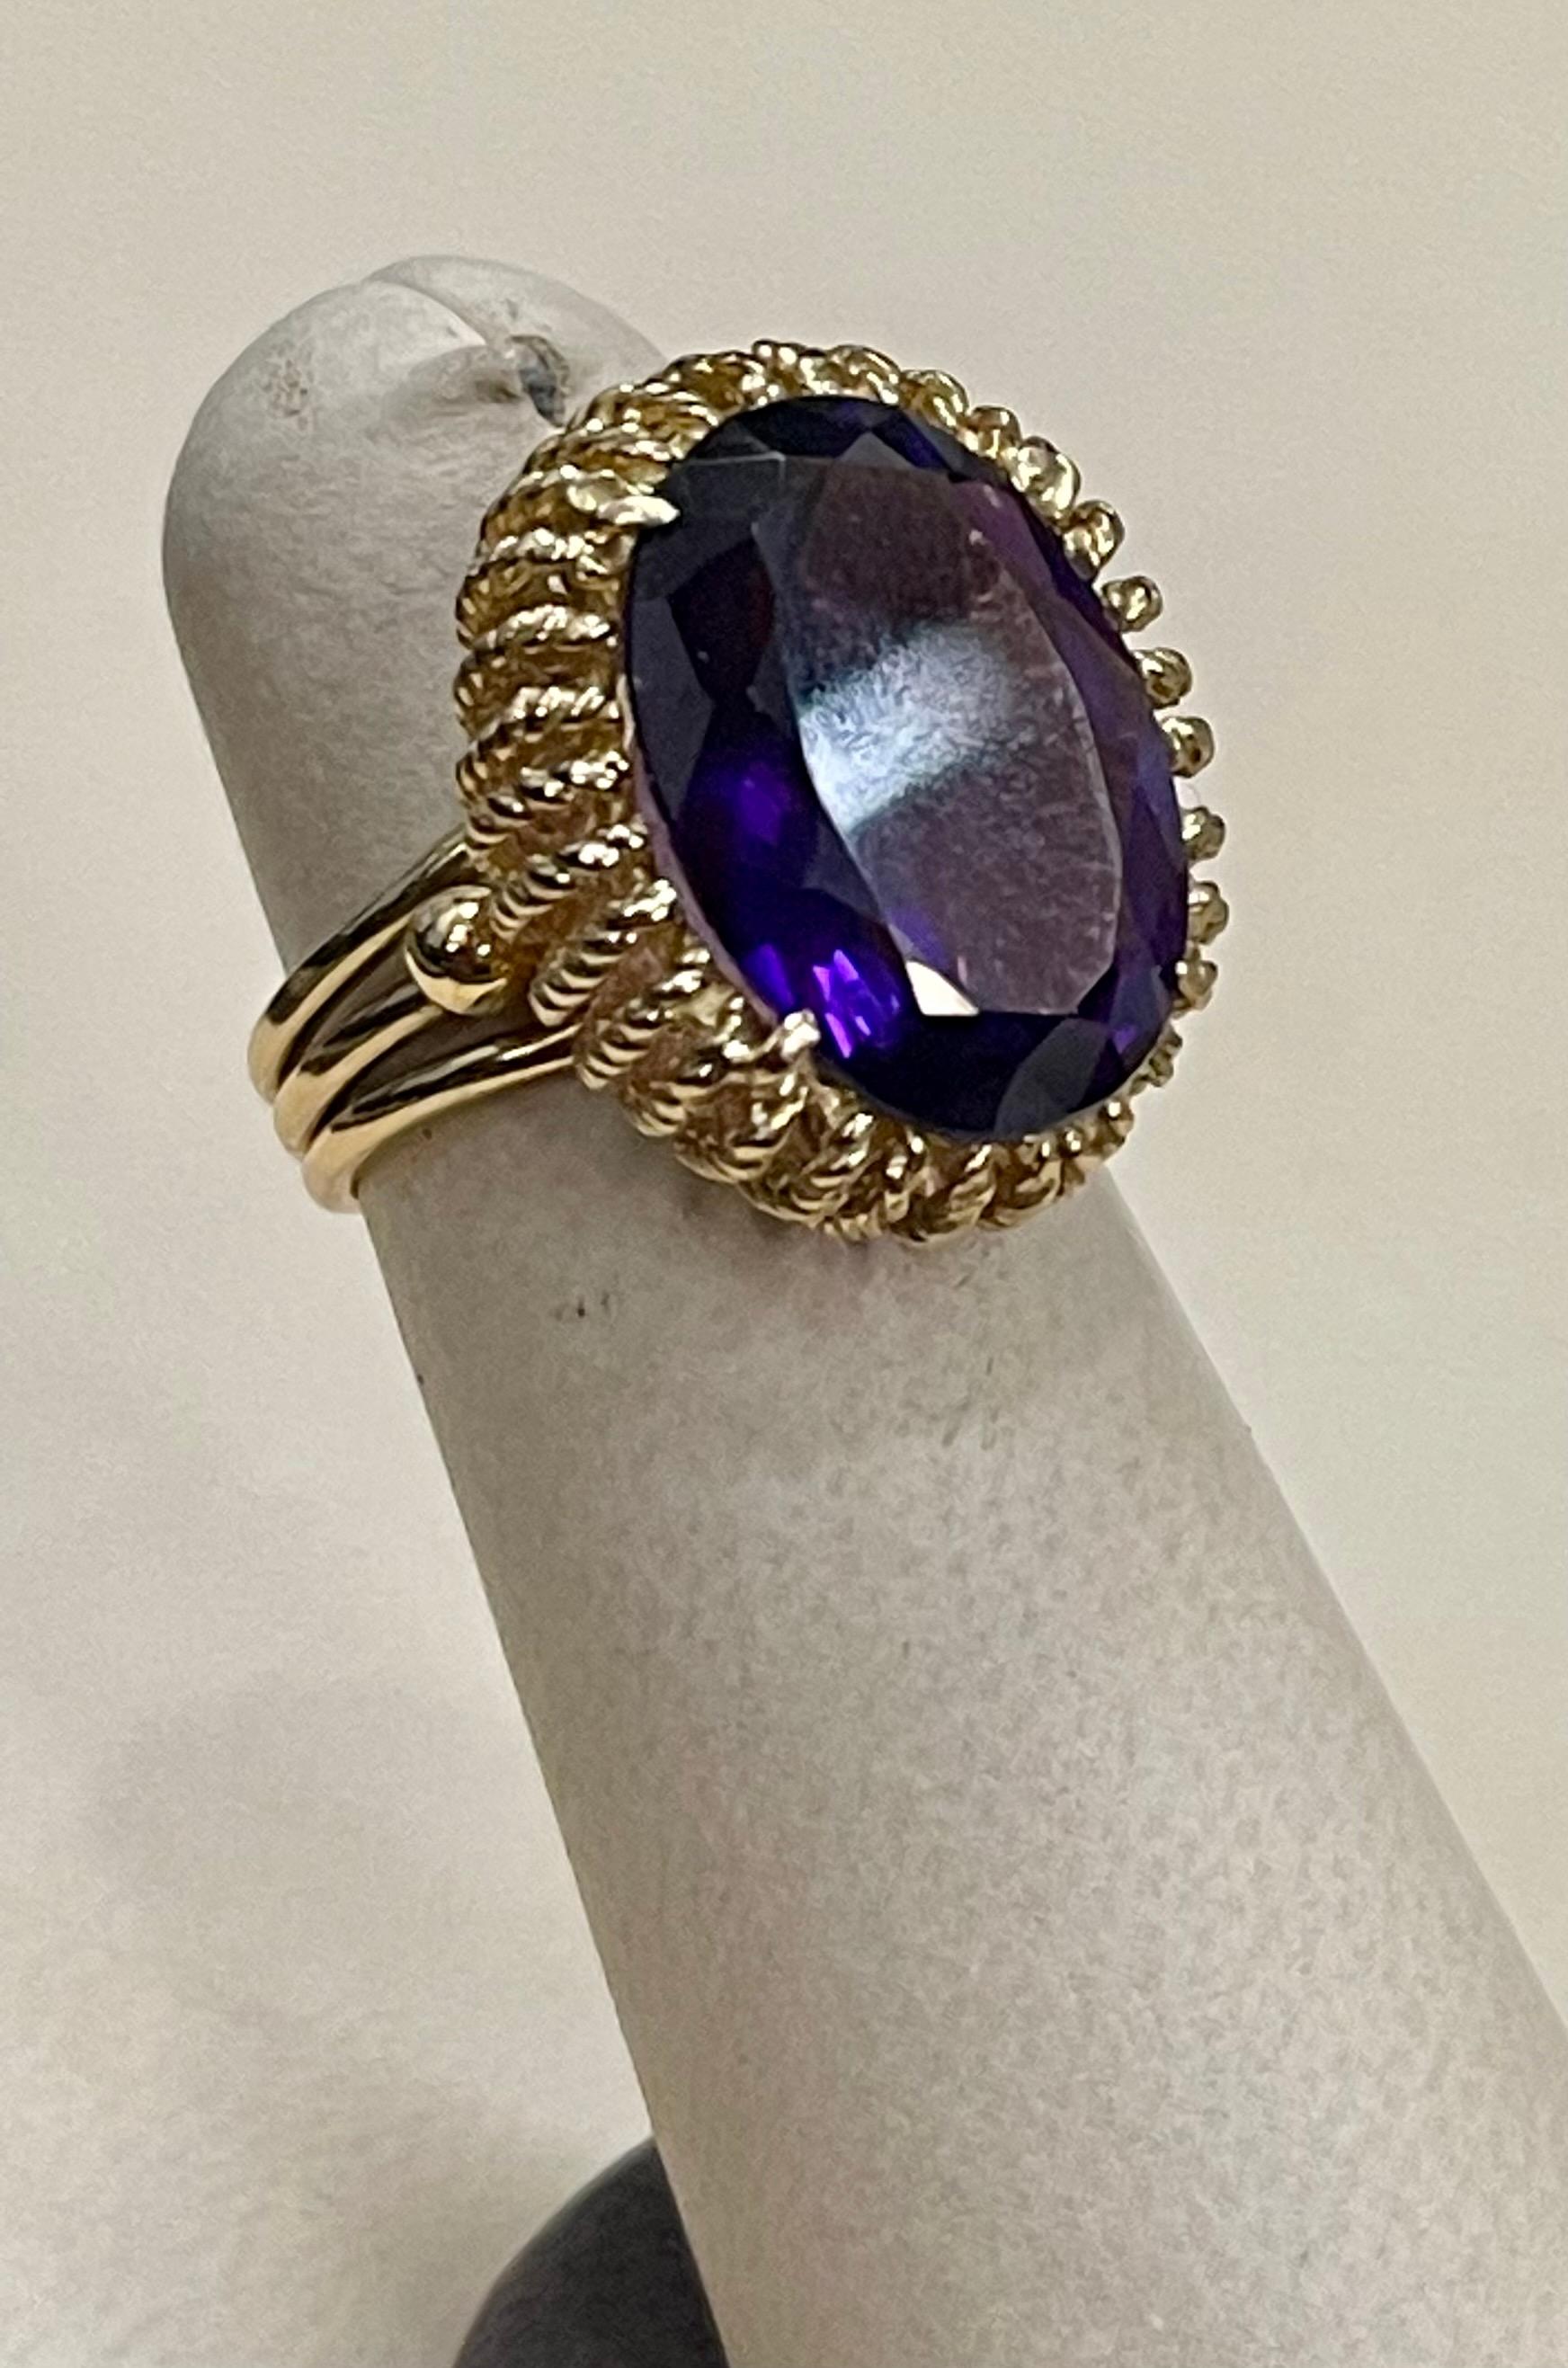 13 Carat Natural Oval Amethyst Cocktail Ring in 18 Karat Yellow Gold, Estate For Sale 2